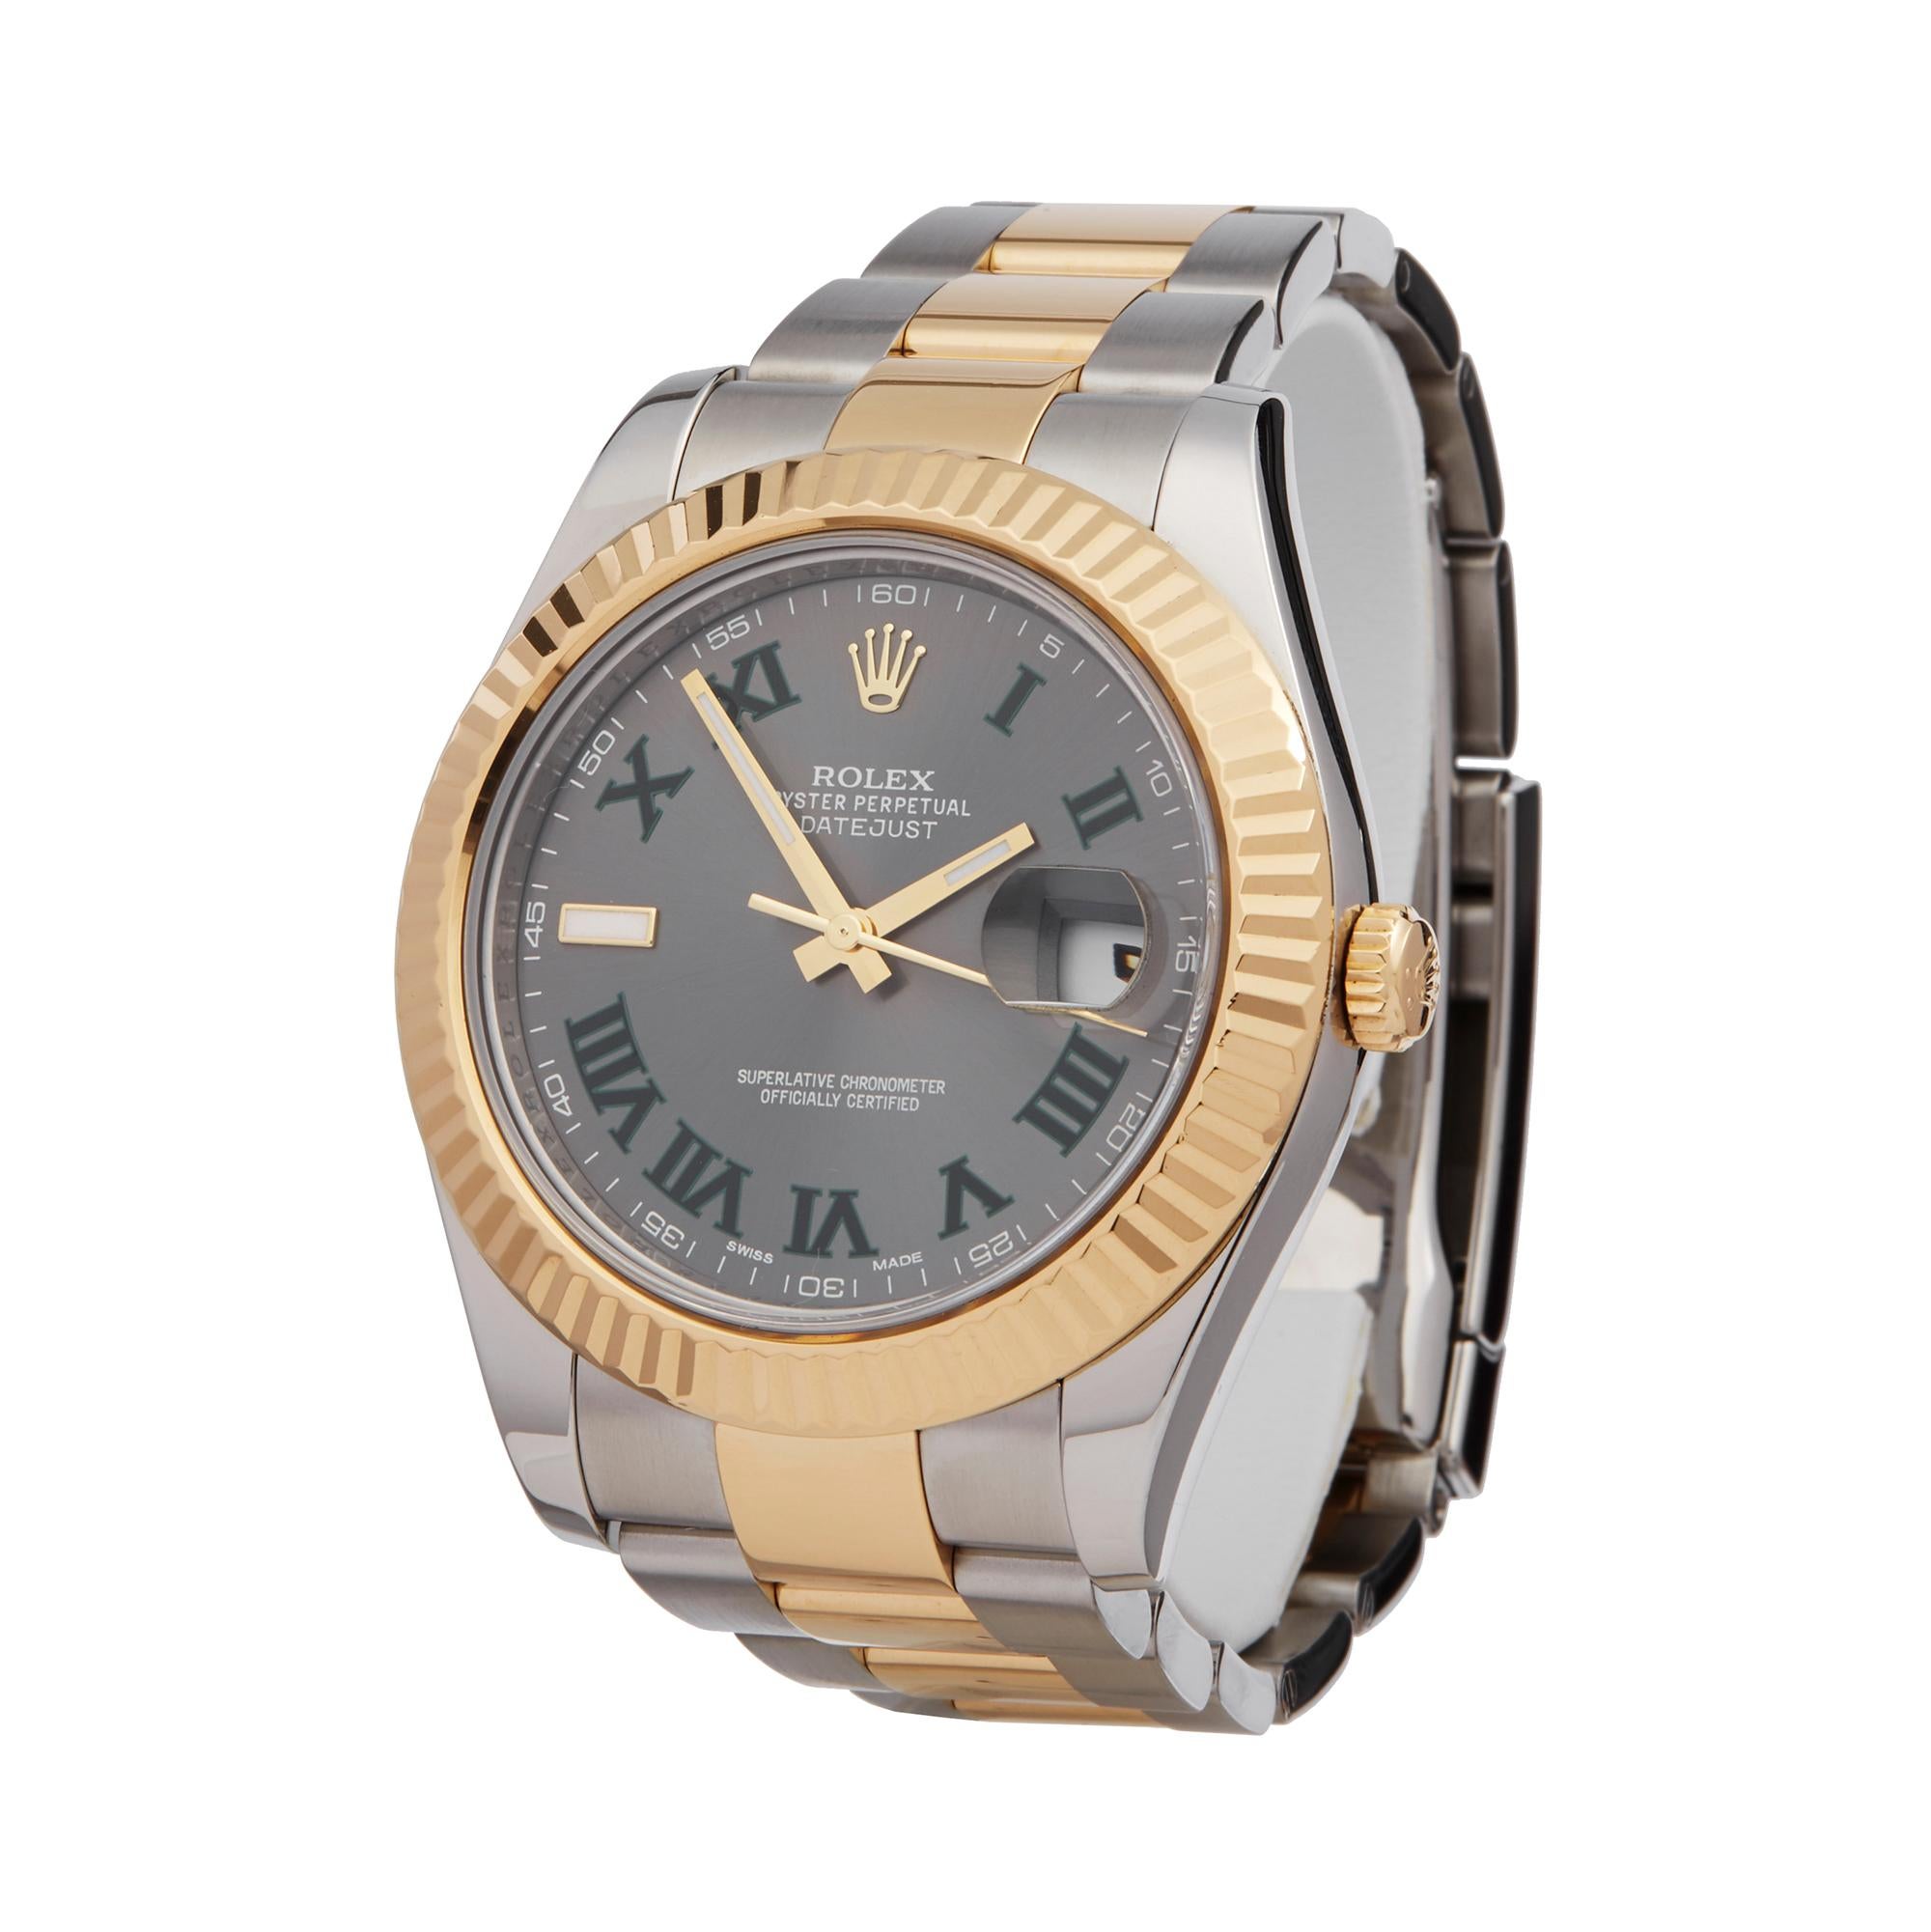 Ref: W6217
Manufacturer: Rolex
Model: Datejust 
Model Ref: 116333
Age: 8th November 2015
Gender: Mens
Complete With: Box & Guarantee
Dial: Grey Roman
Glass: Sapphire Crystal
Movement: Automatic
Water Resistance: To Manufacturers Specifications
Case: